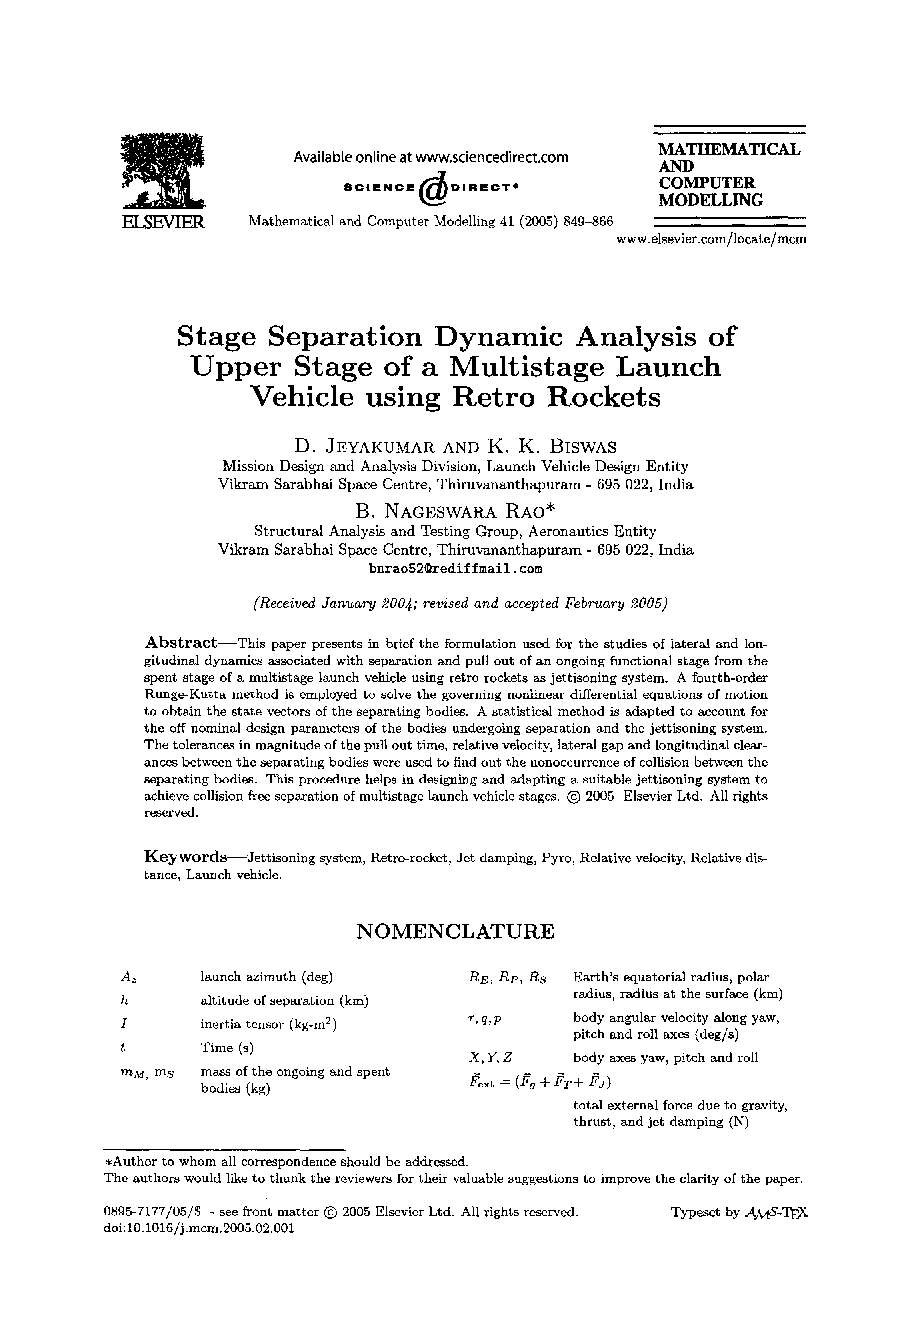 Stage separation dynamic analysis of upper stage of a multistage launch vehicle using retro rockets